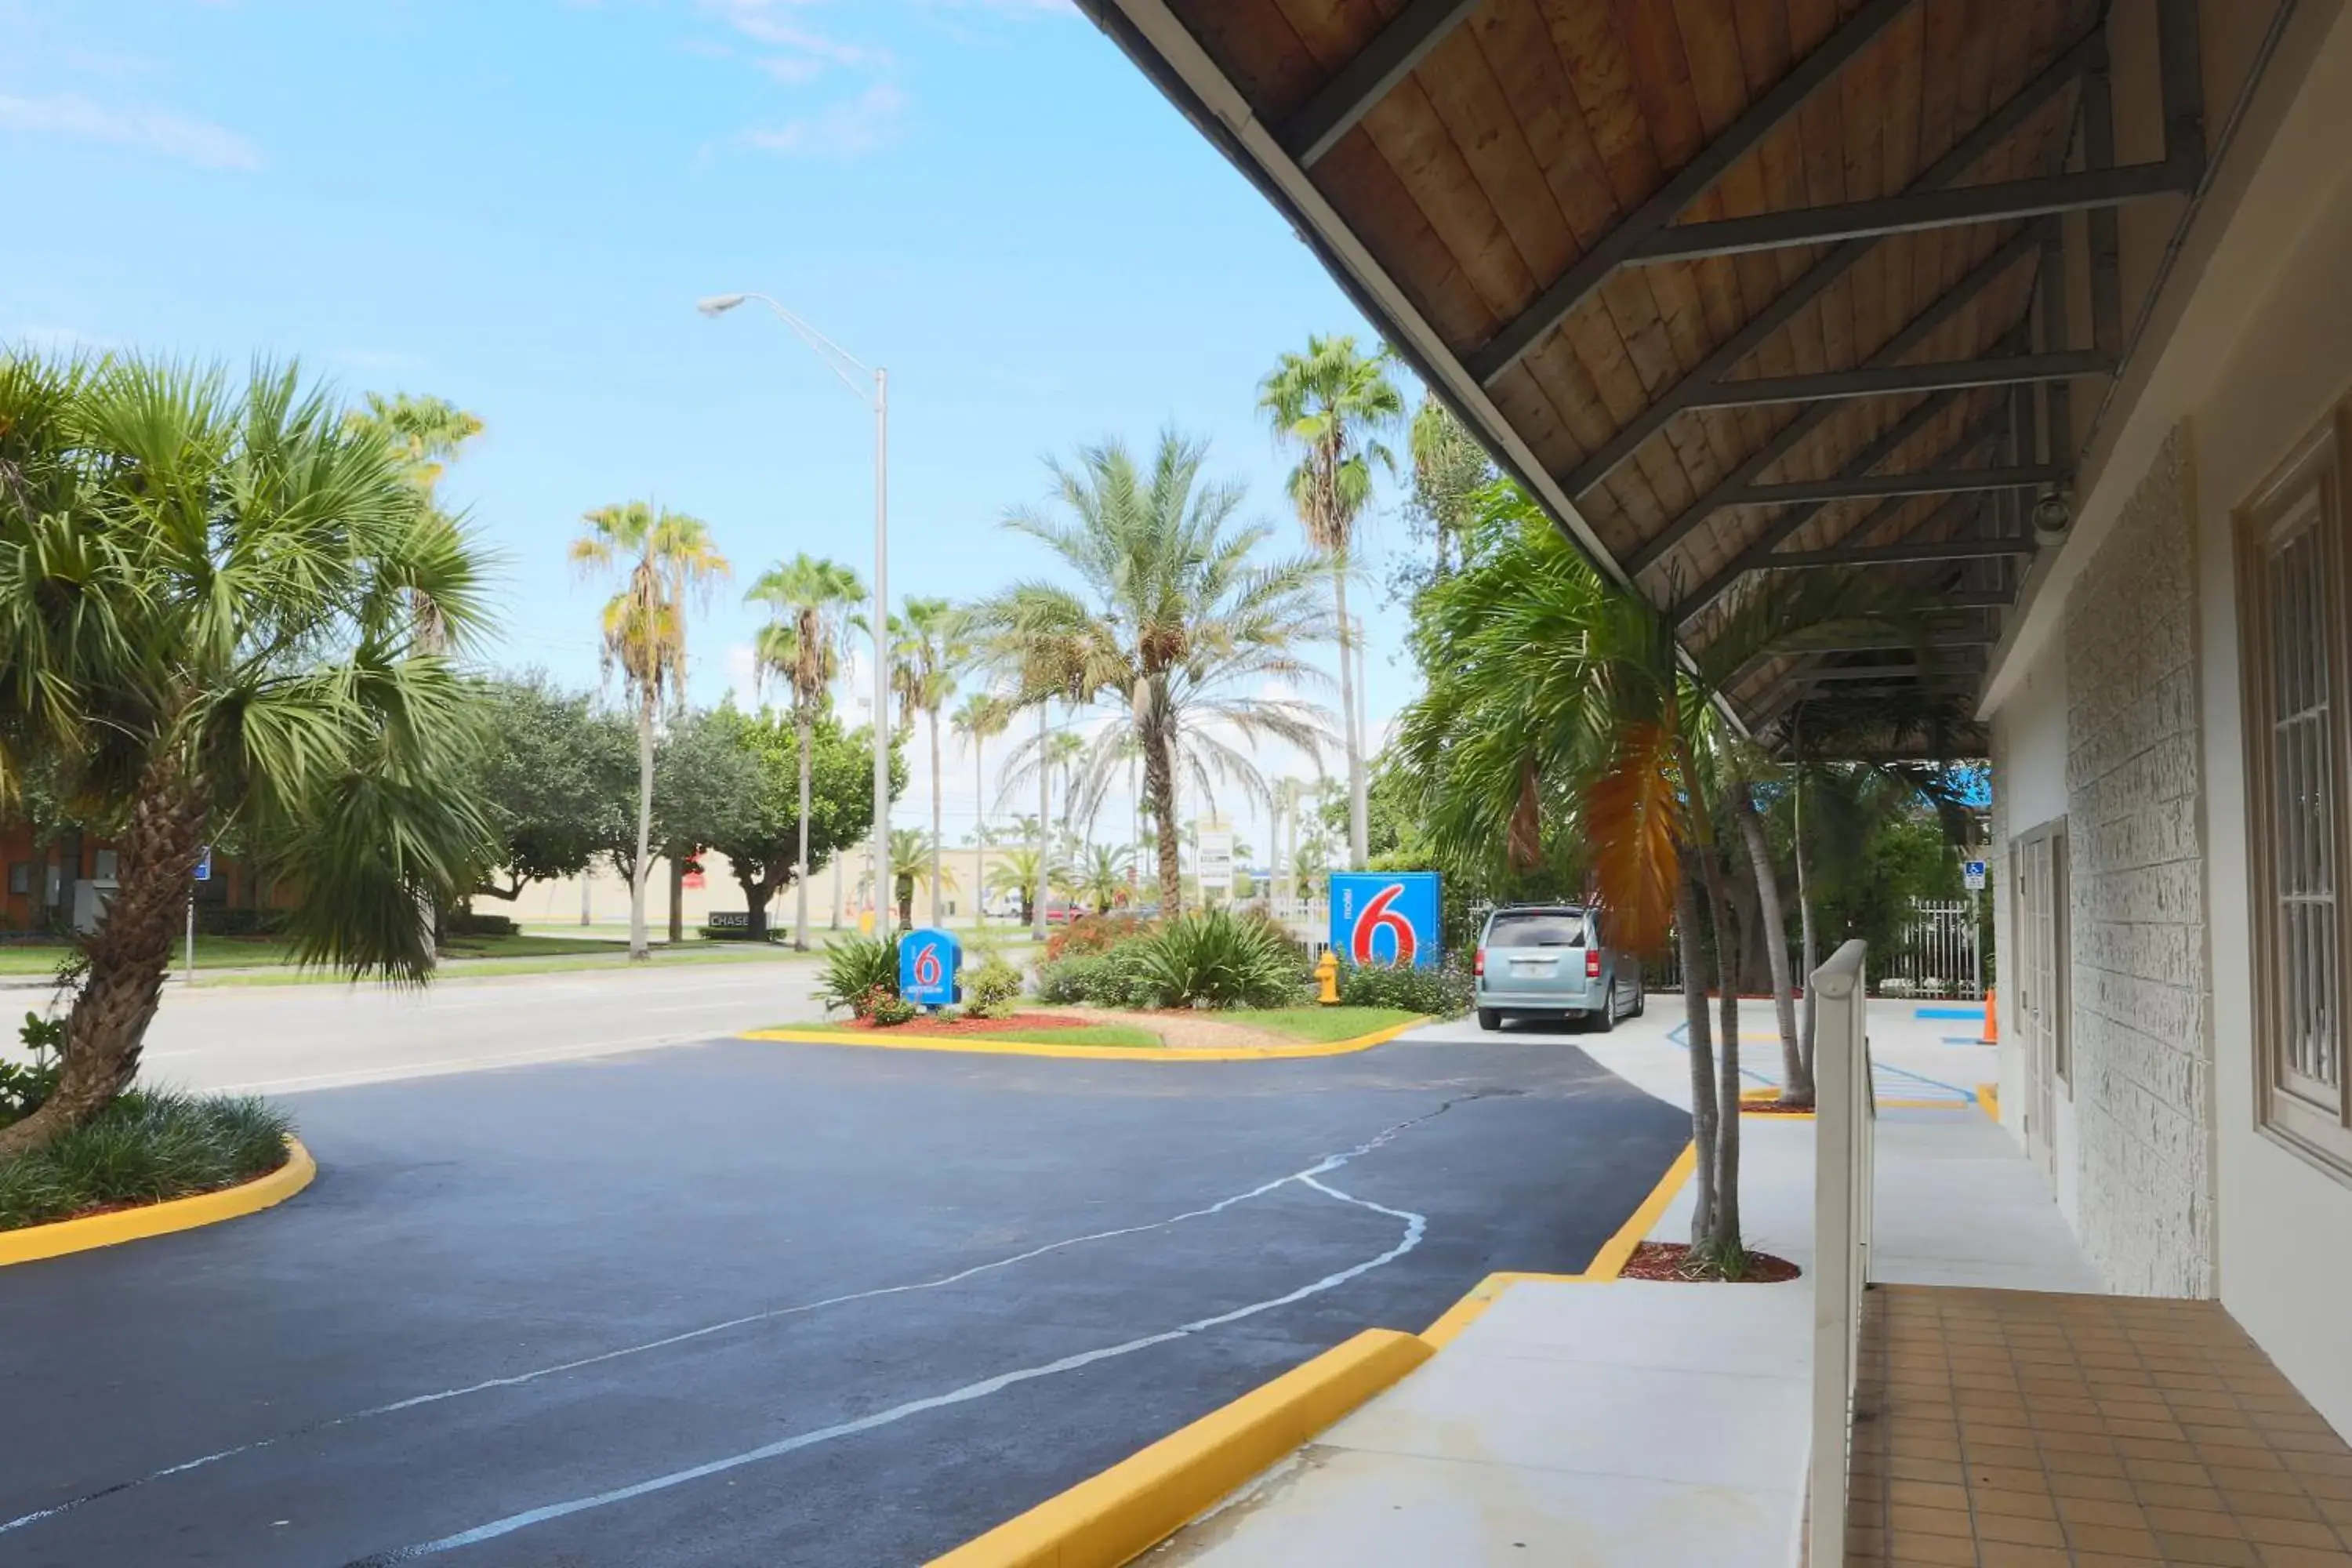 Area and facilities in Motel 6-Cutler Bay, FL